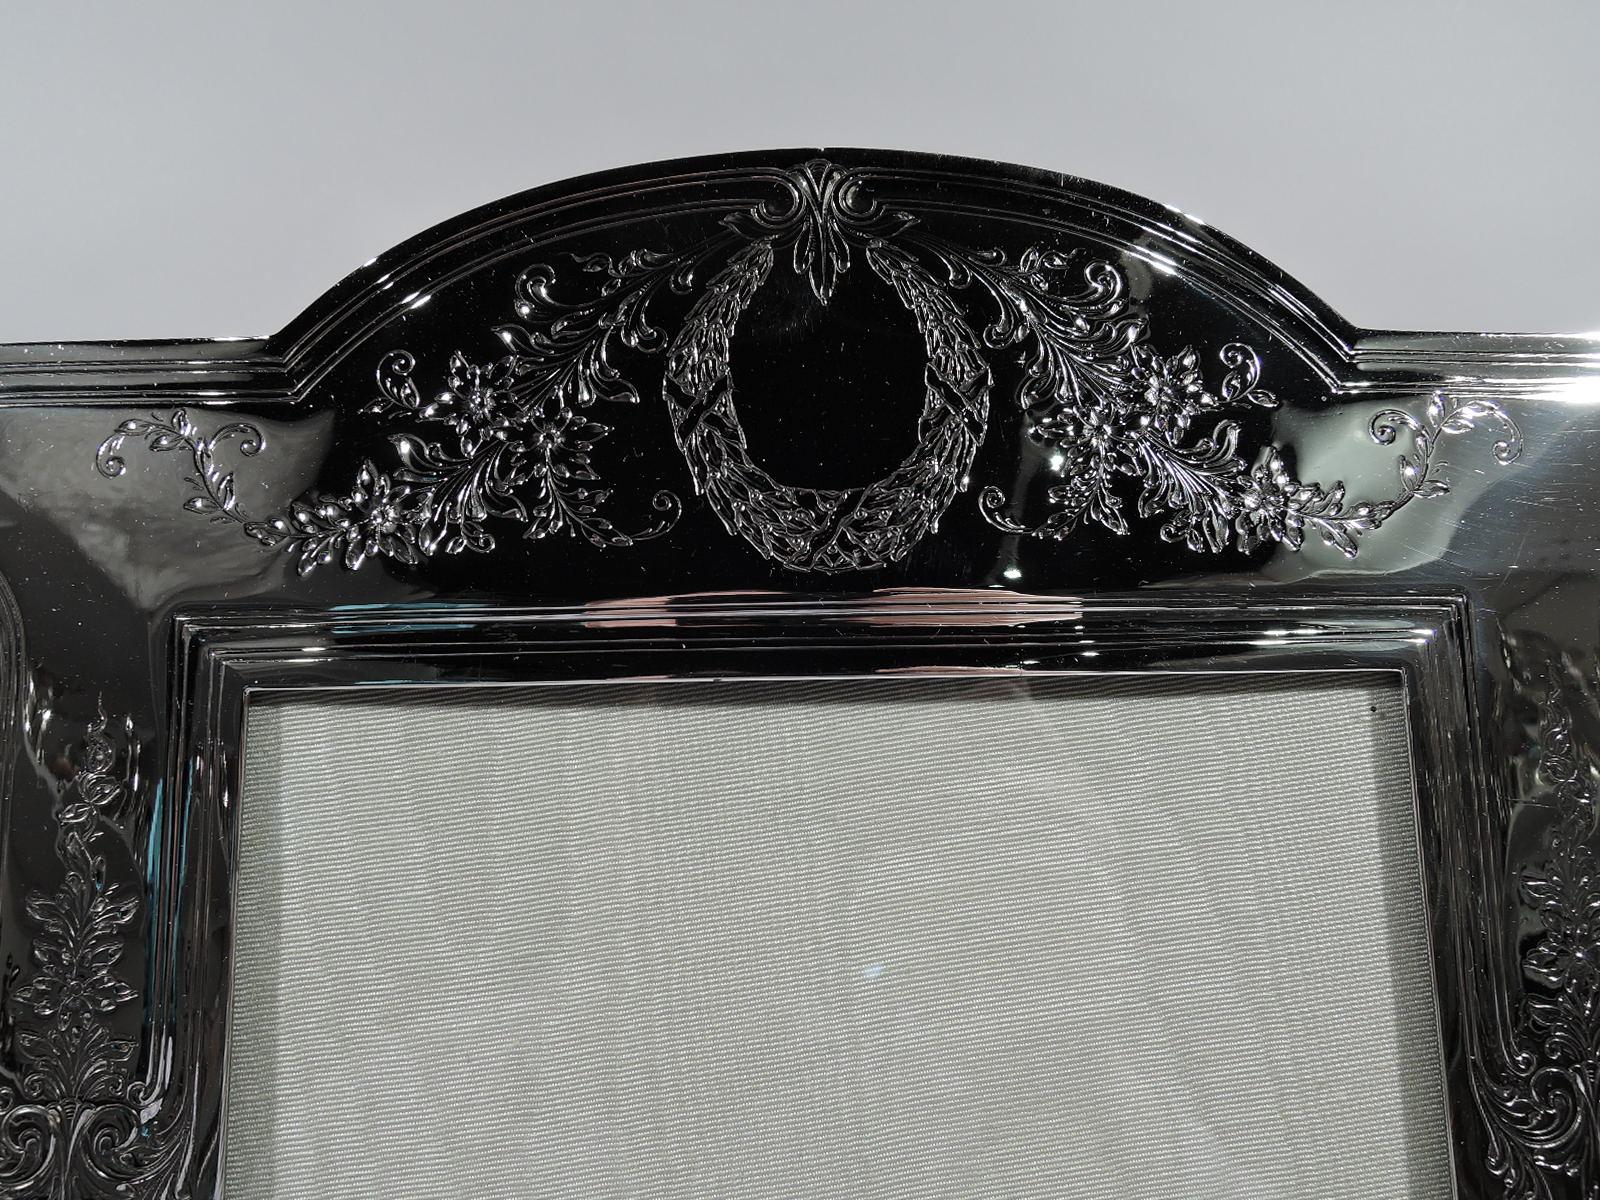 Large turn-of-the-century Edwardian Regency sterling silver picture frame. Made by Durgin (part of Gorham) in Concord, New Hampshire. Rectangular window in shaped surround with straight sides, bracket feet, and arched top. Engraved garlands and